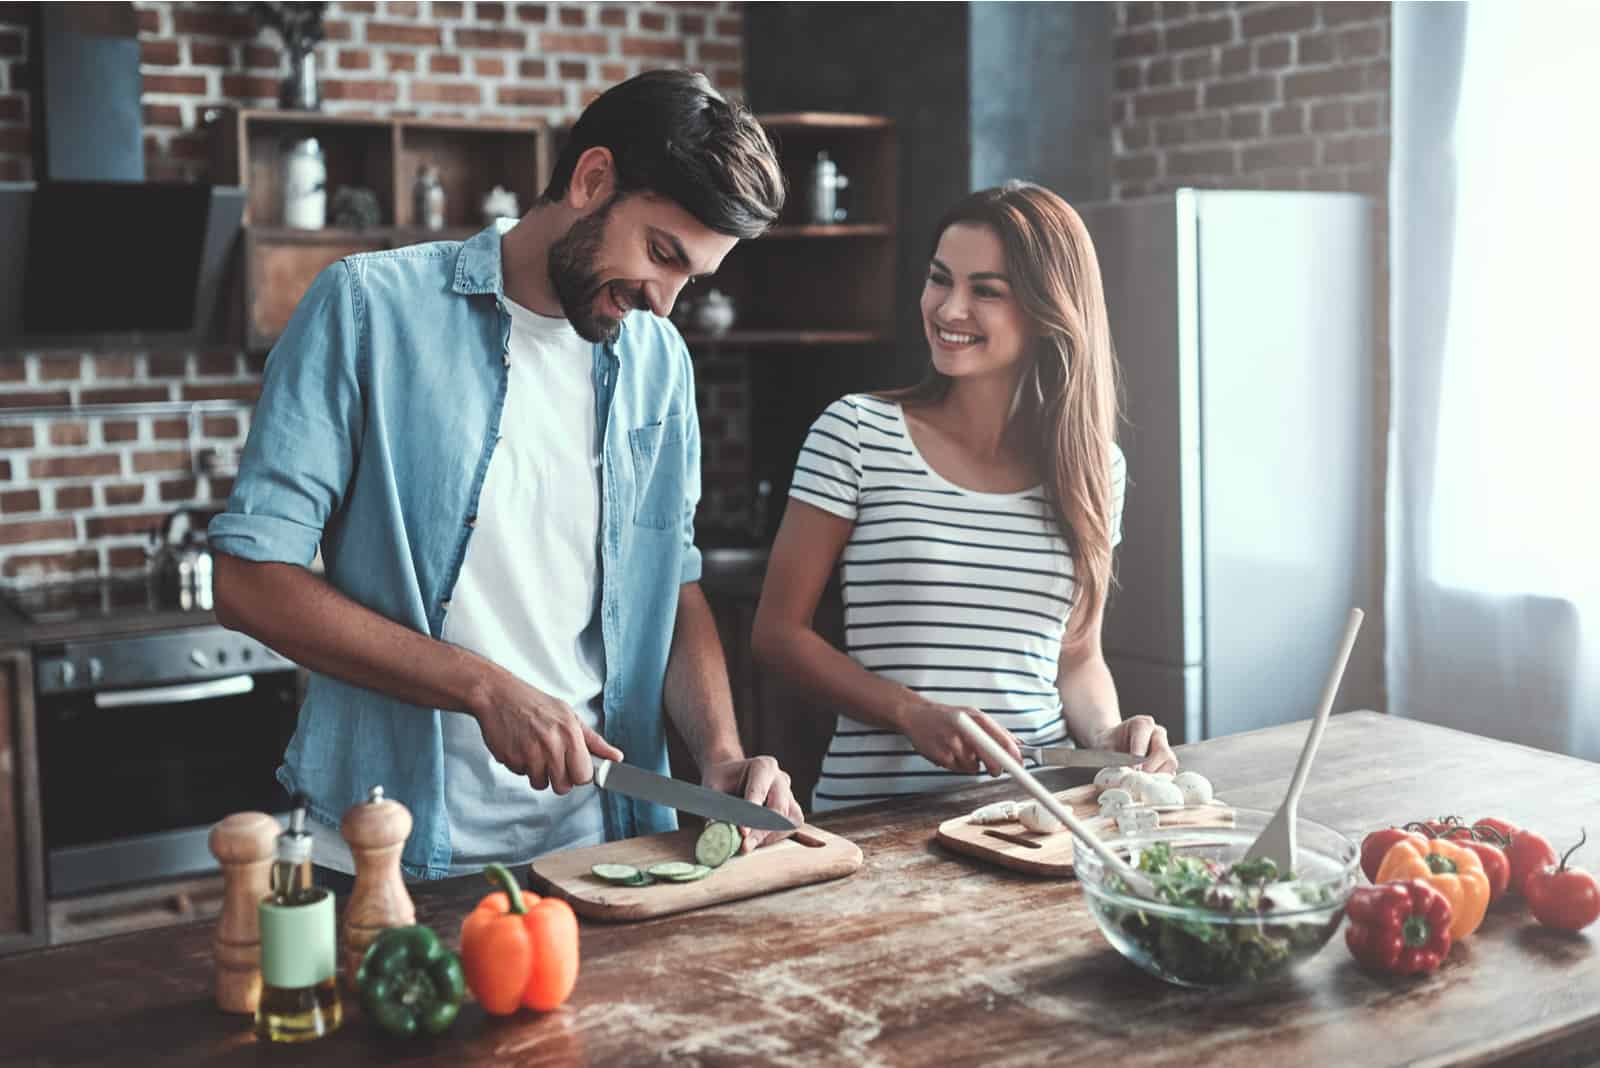 a smiling man and woman cooking together in the kitchen